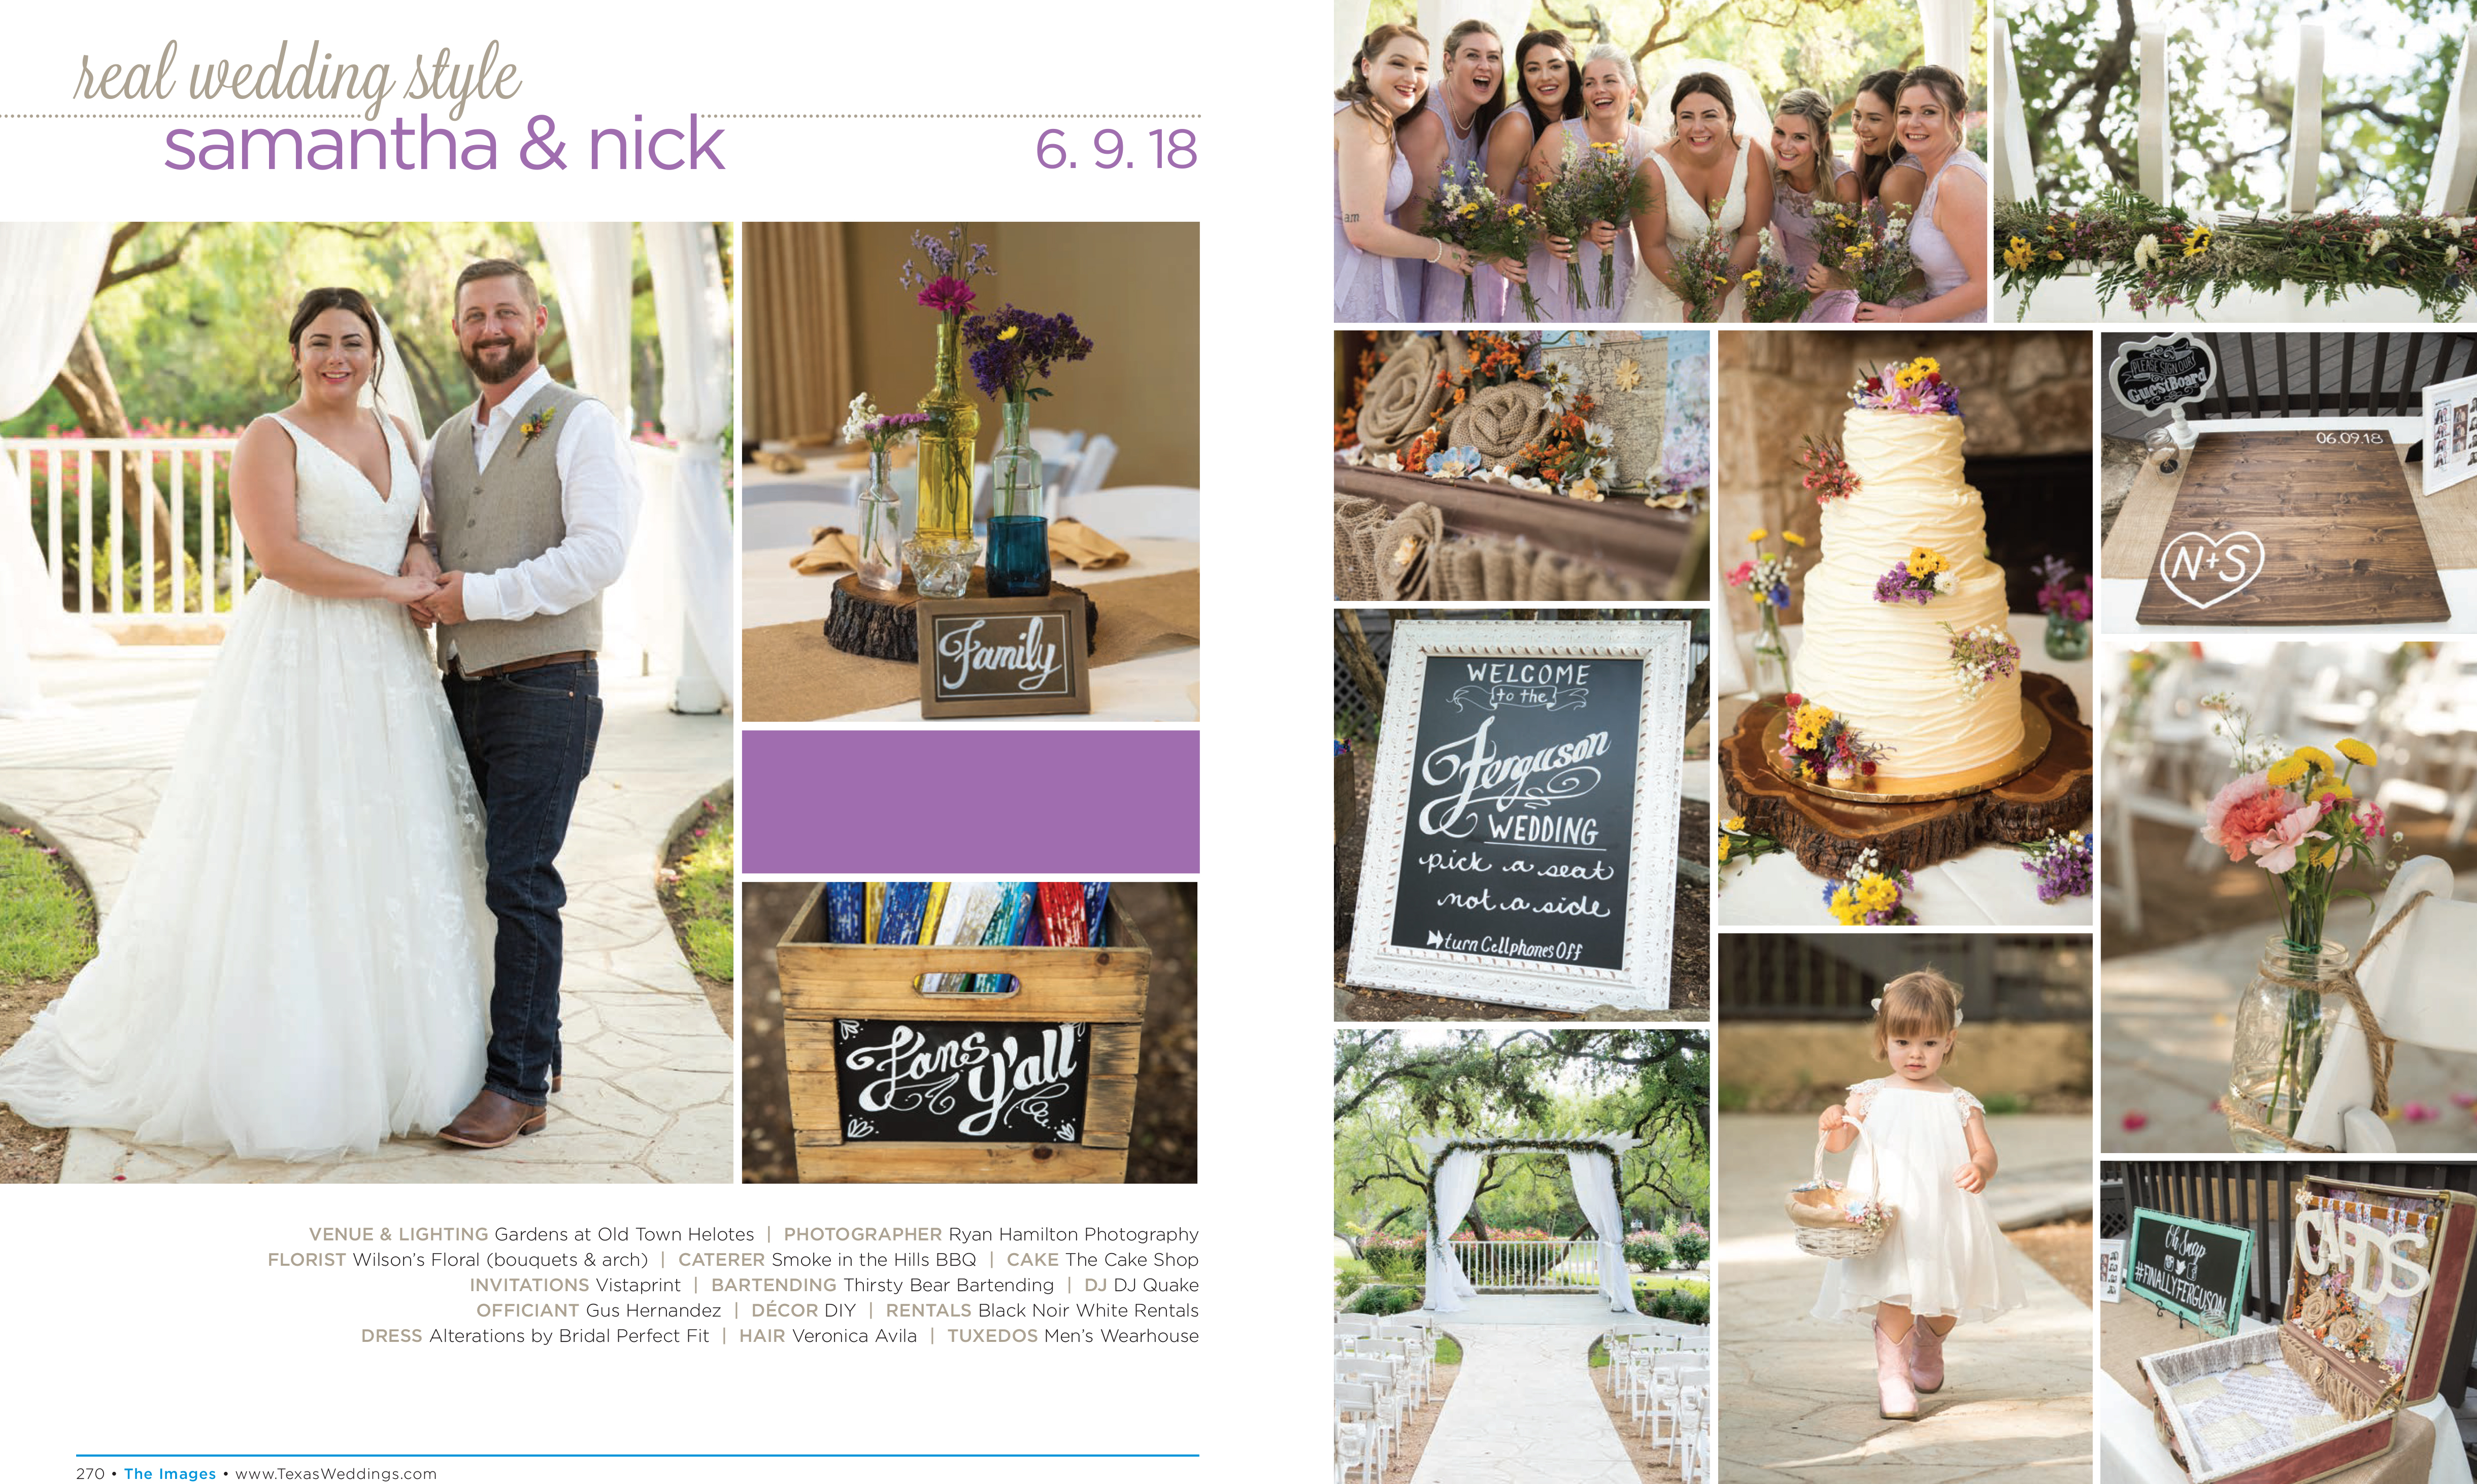 Samantha & Nick in their Real Wedding Page in the Fall/Winter 2018 Texas Wedding Guide